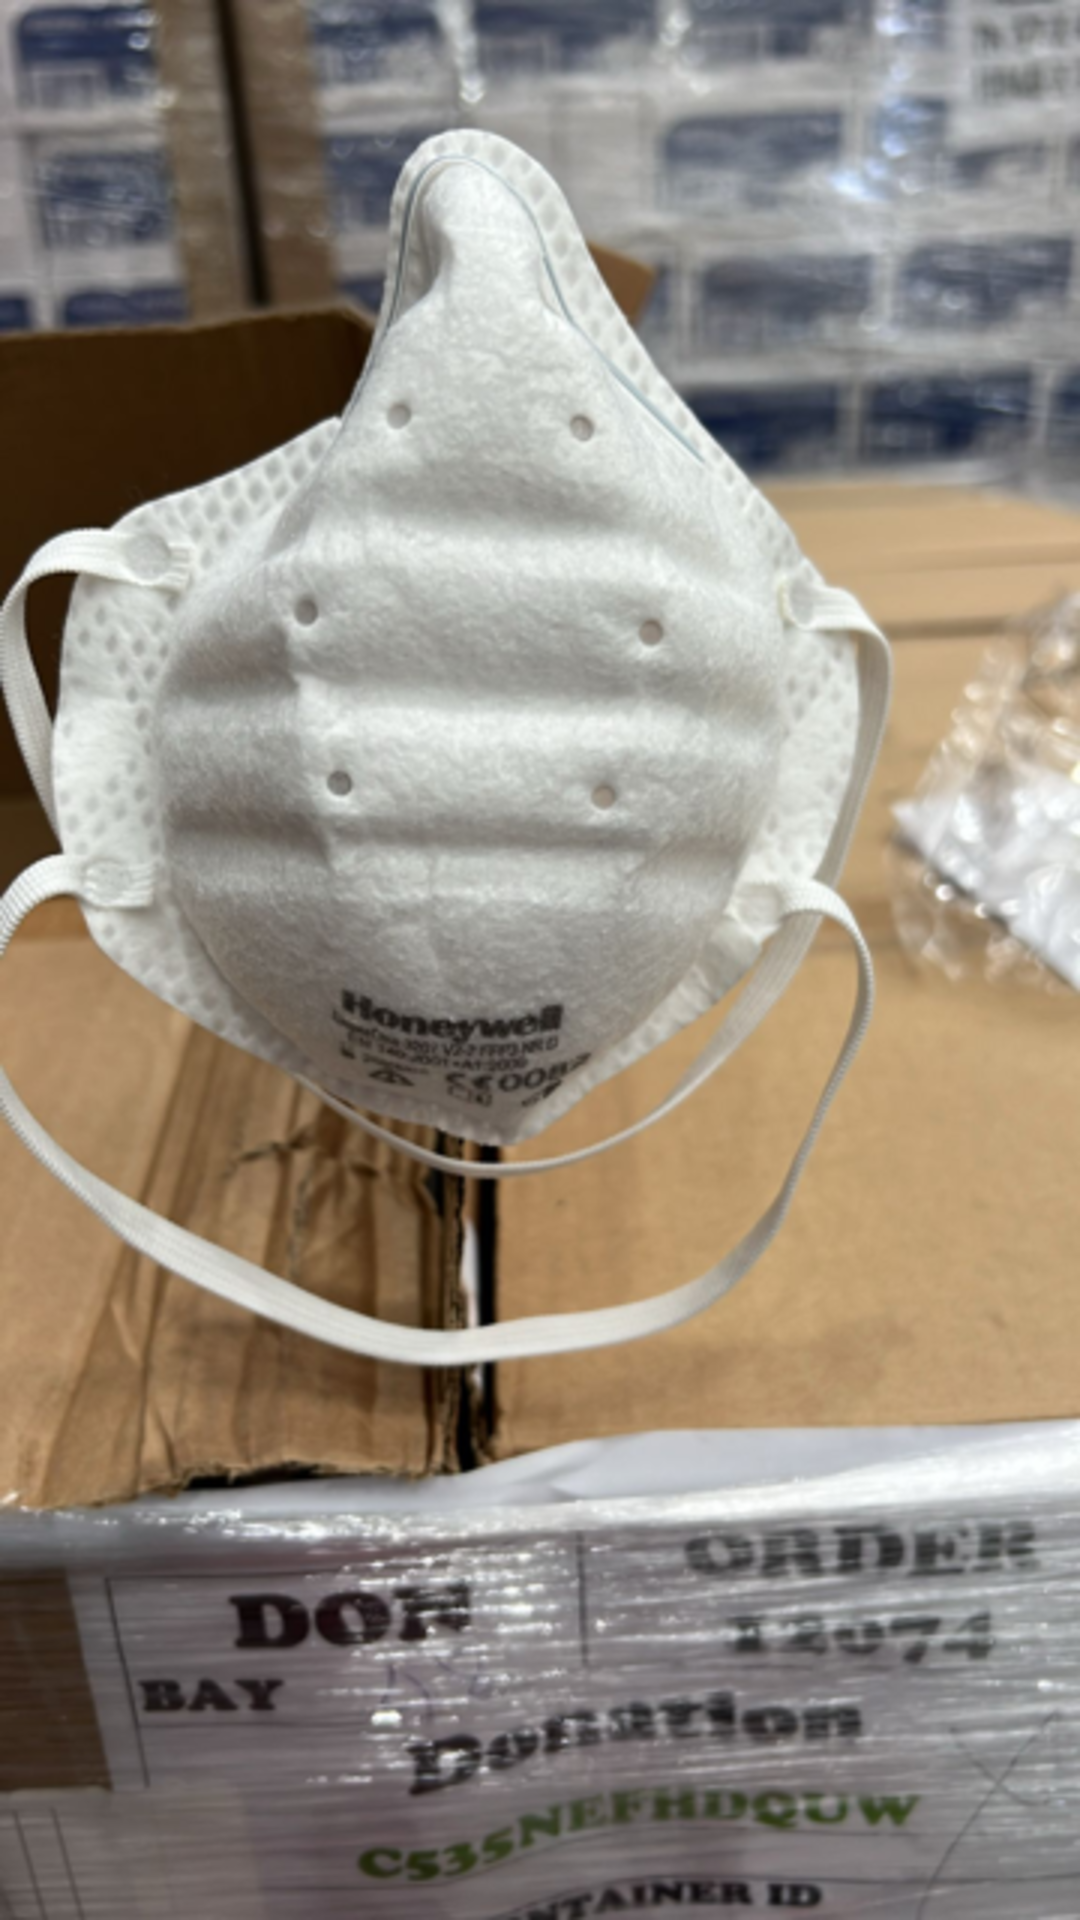 216 X BRAND NEW PACKS OF 16 HONEYWELL NORTH UPERONE FFP3 FILTERING HALF MASKS (EXP 2026) - Image 3 of 3